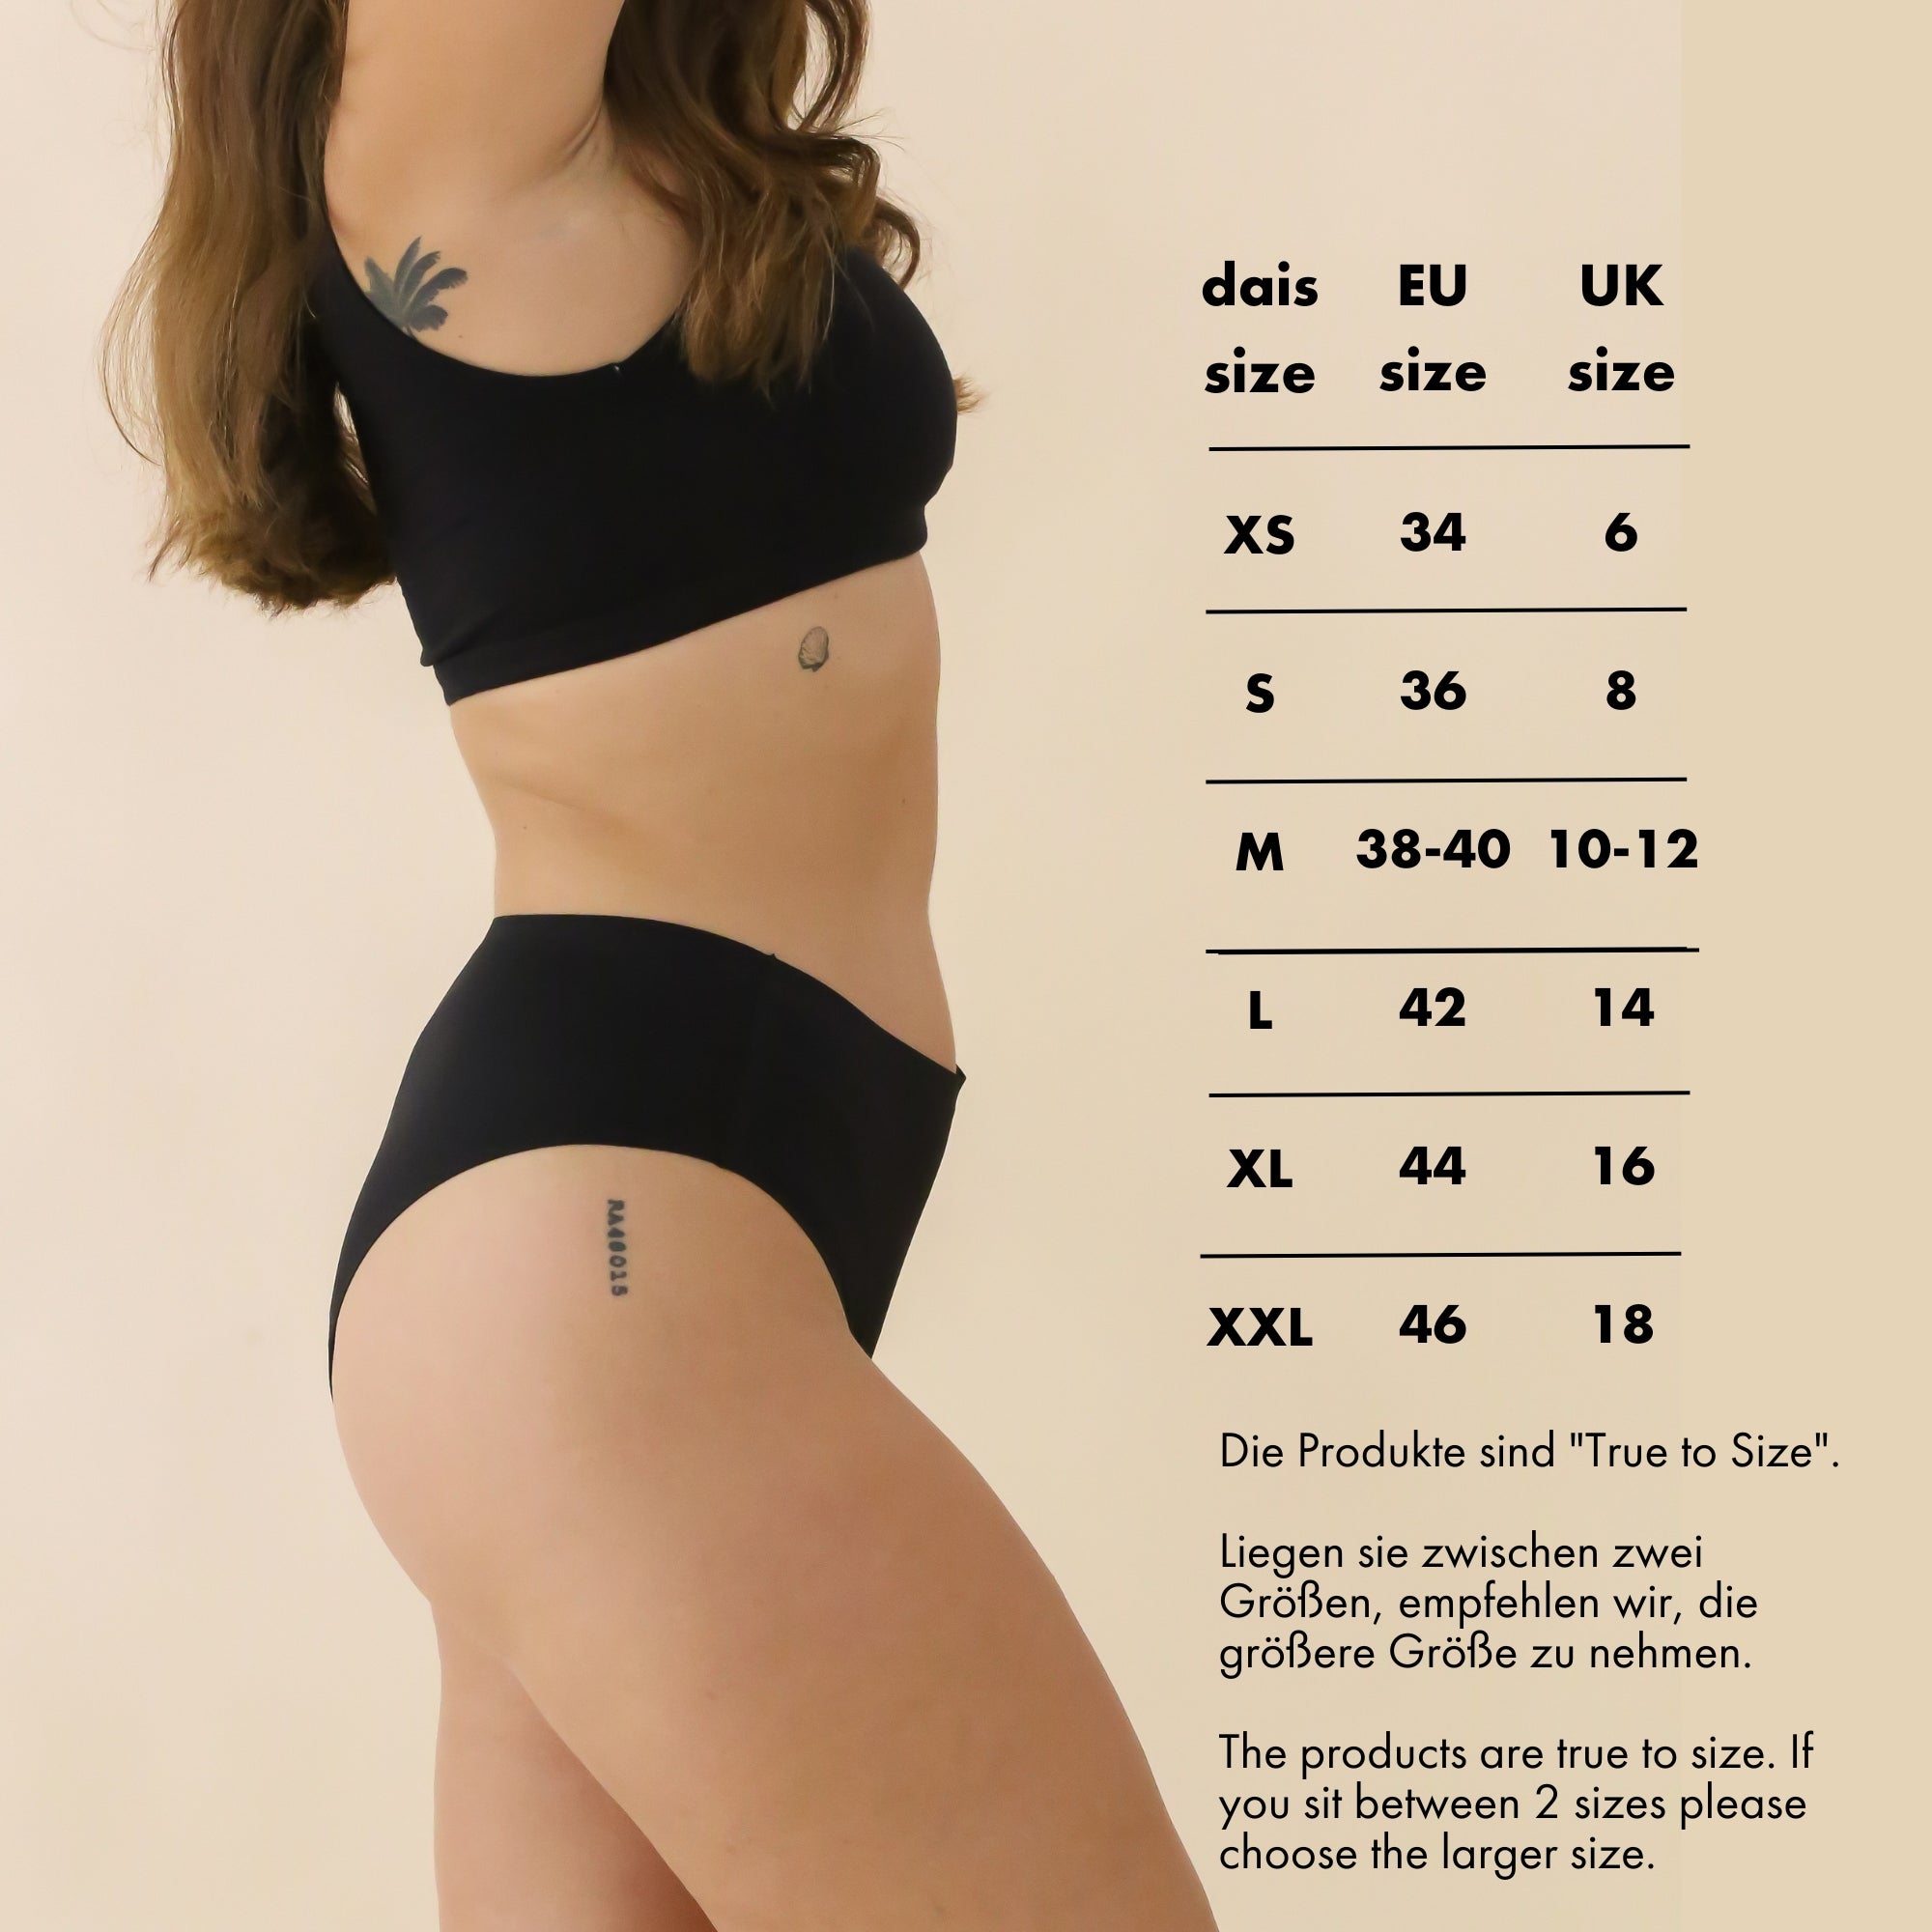 Size chart for dais period underwear in cheeky cut with options XS, S, M, L, XL, XXL with EU and UK size conversions.